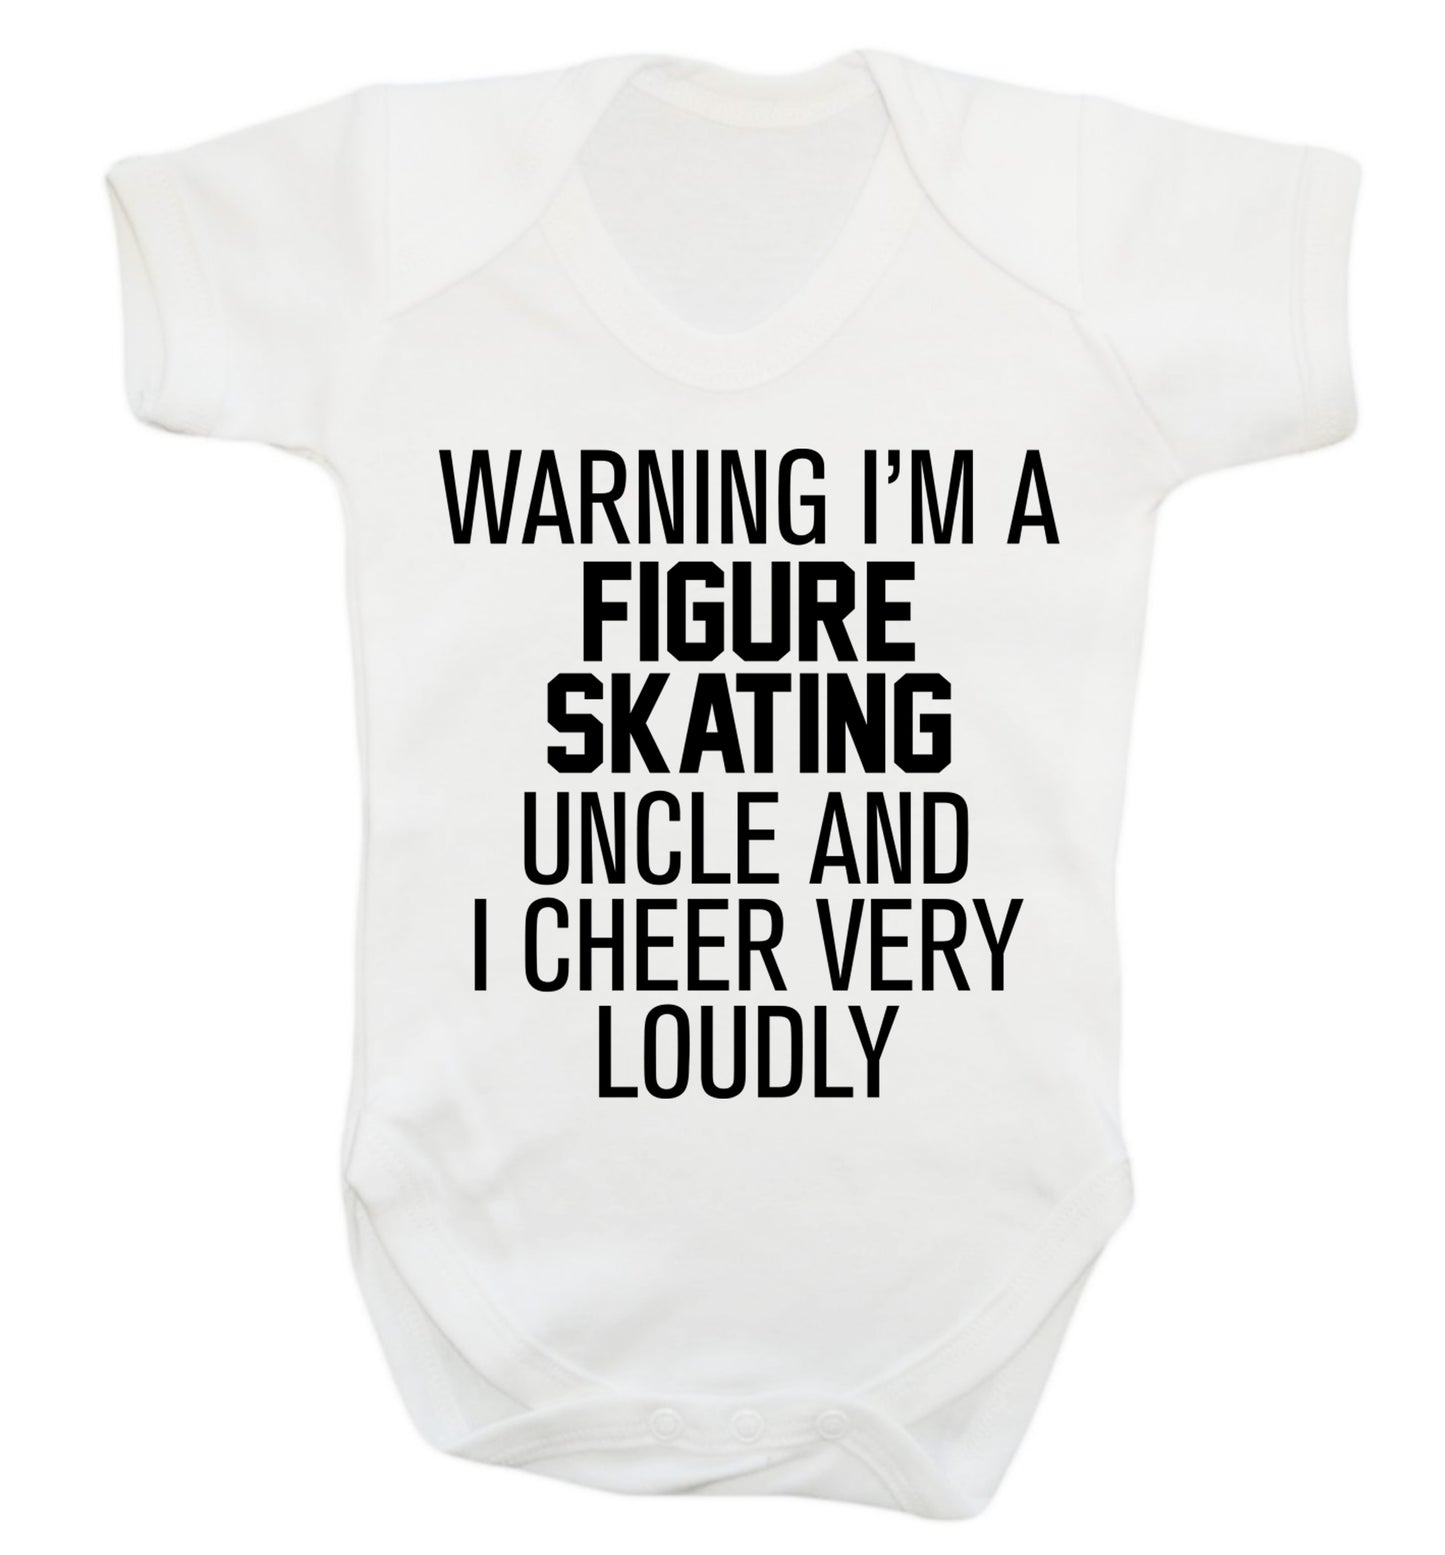 Warning I'm a figure skating uncle and I cheer very loudly Baby Vest white 18-24 months